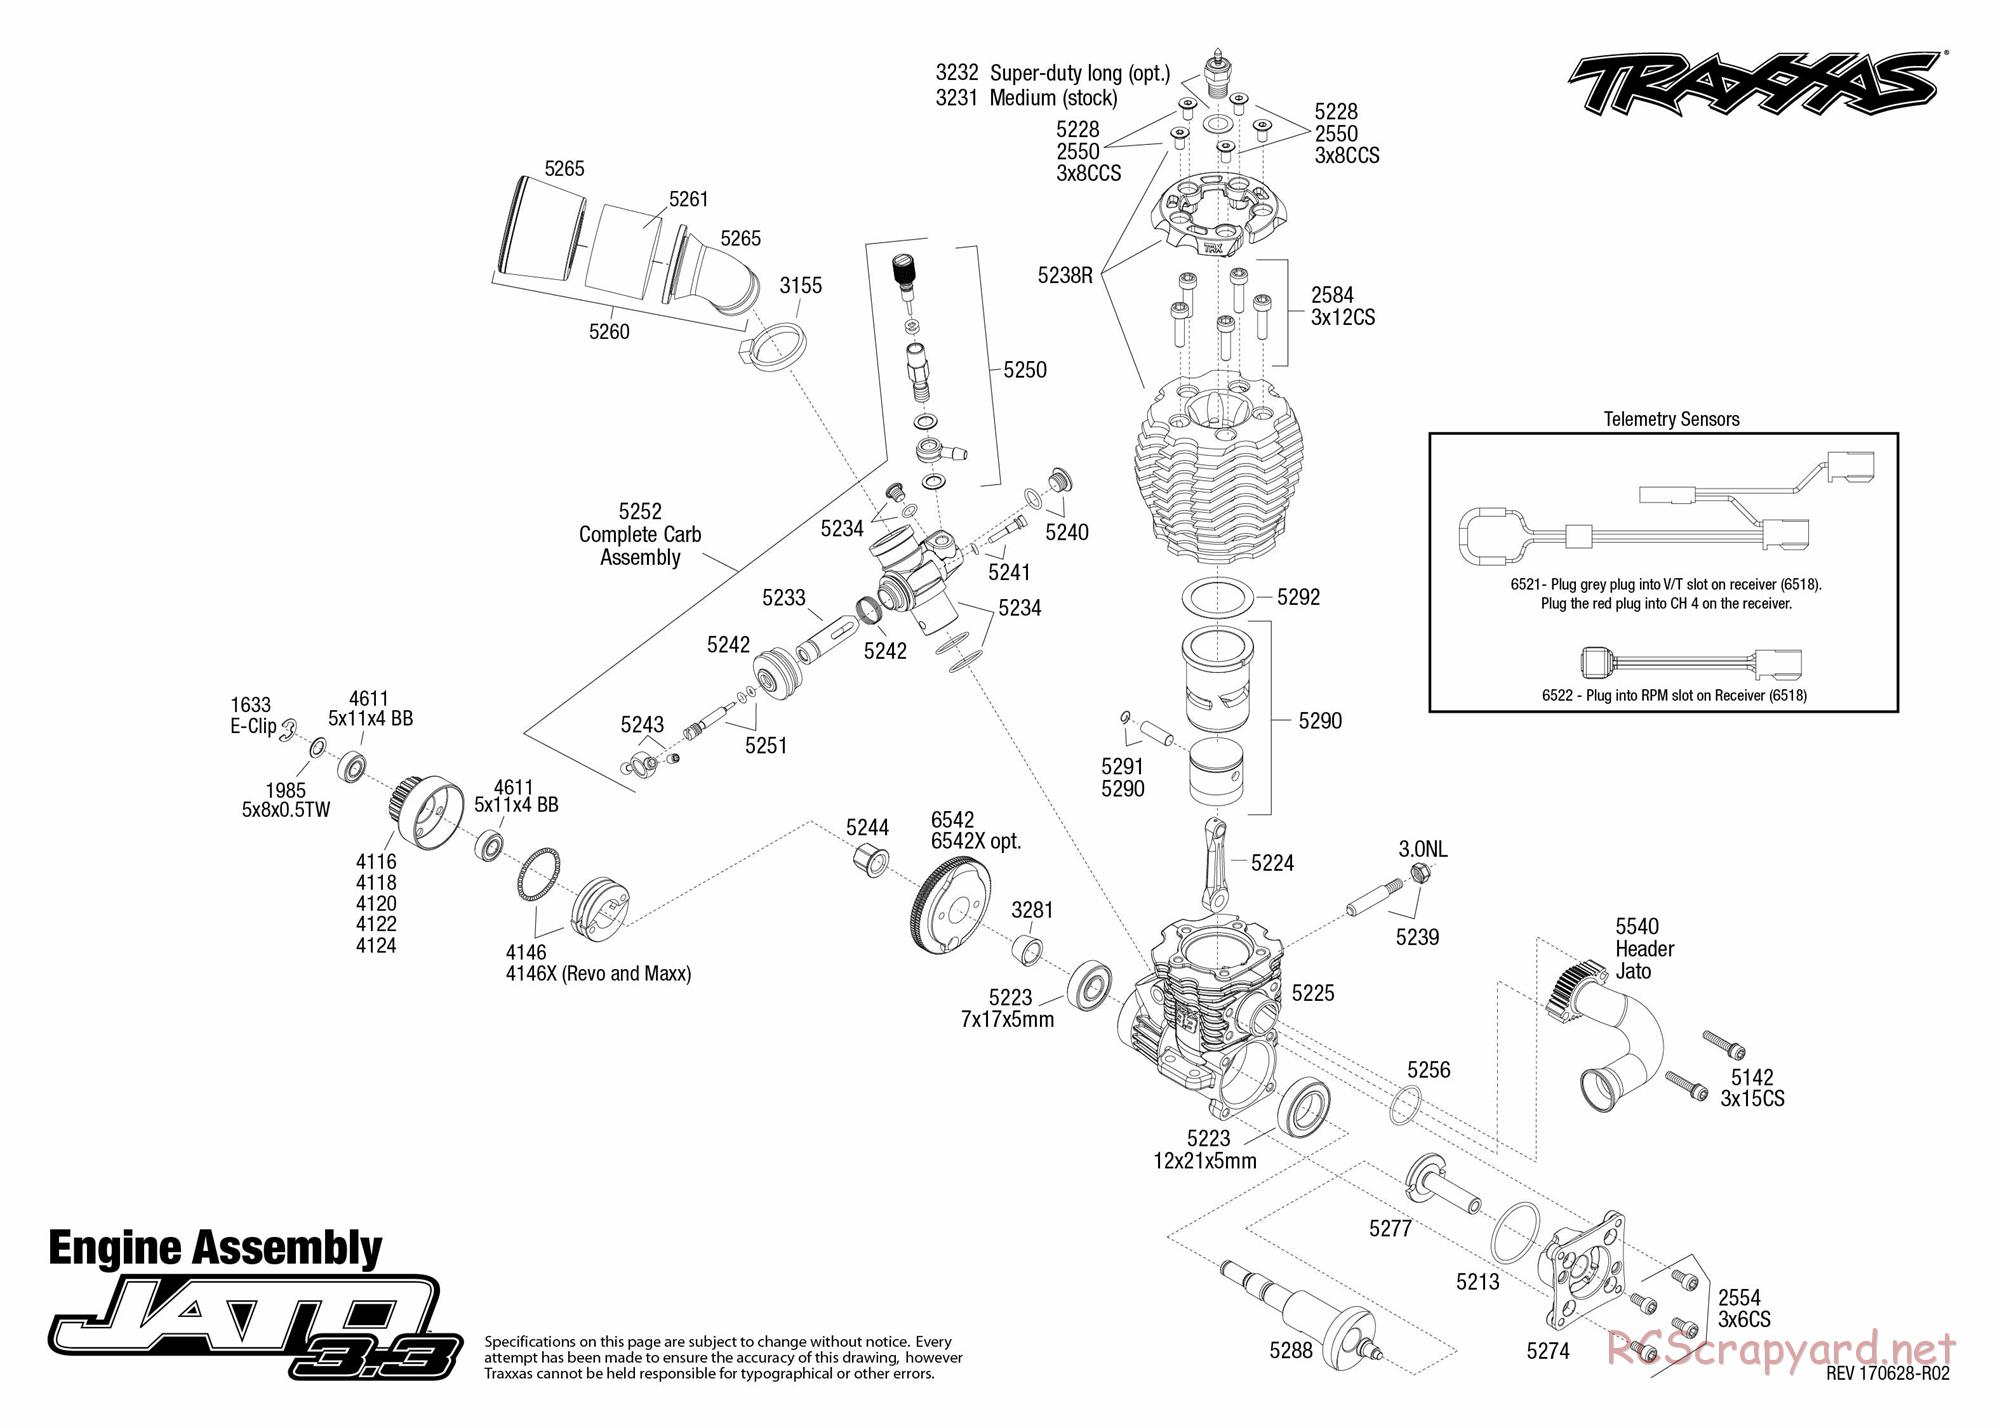 Traxxas - Jato 3.3 (2014) - Exploded Views - Page 2